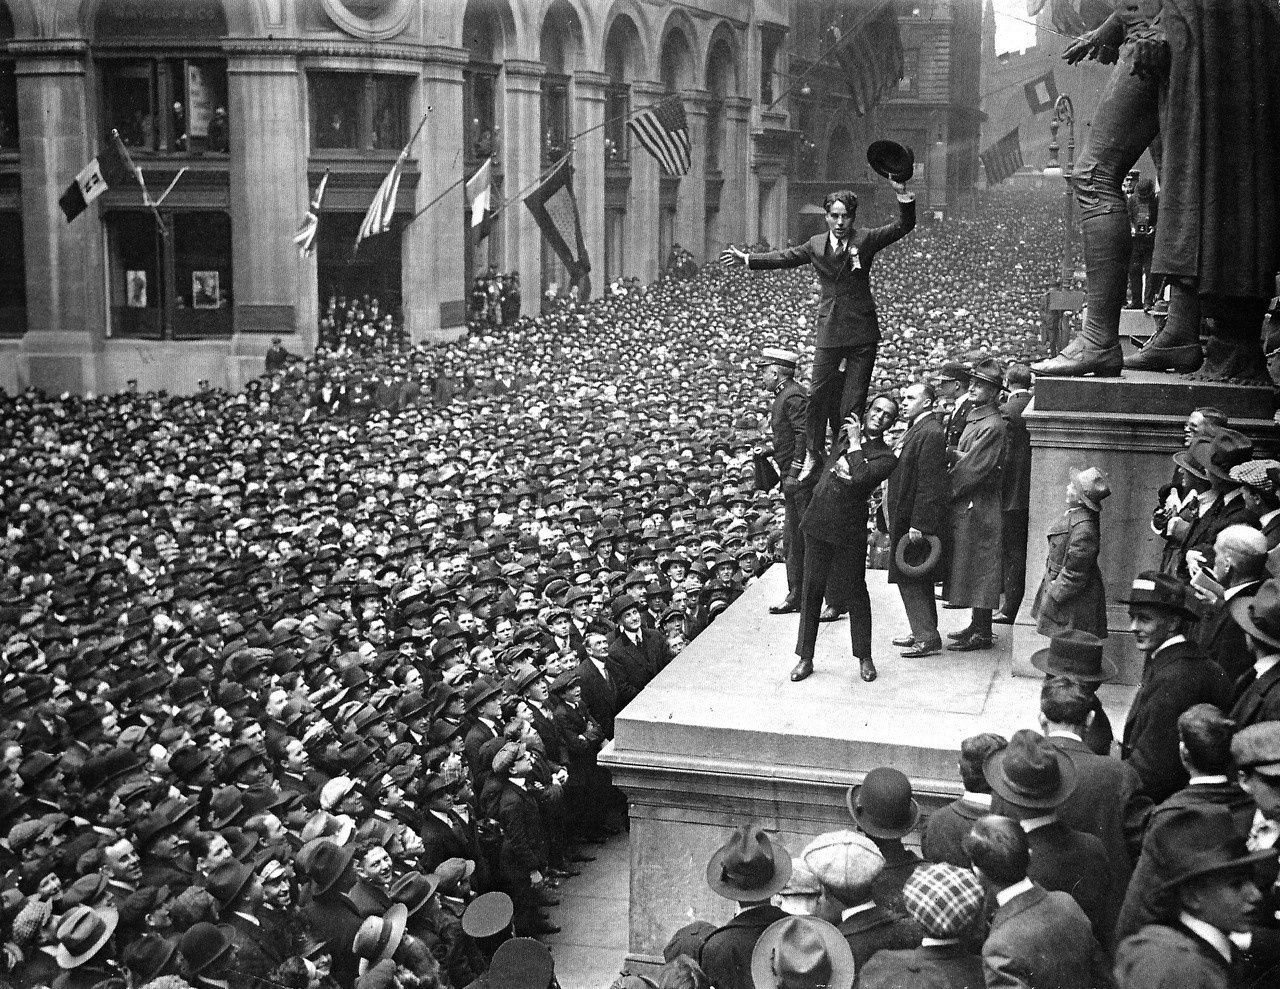 Douglas Fairbanks holding up a triumphant-looking Charlie Chaplin in the middle of New York City.